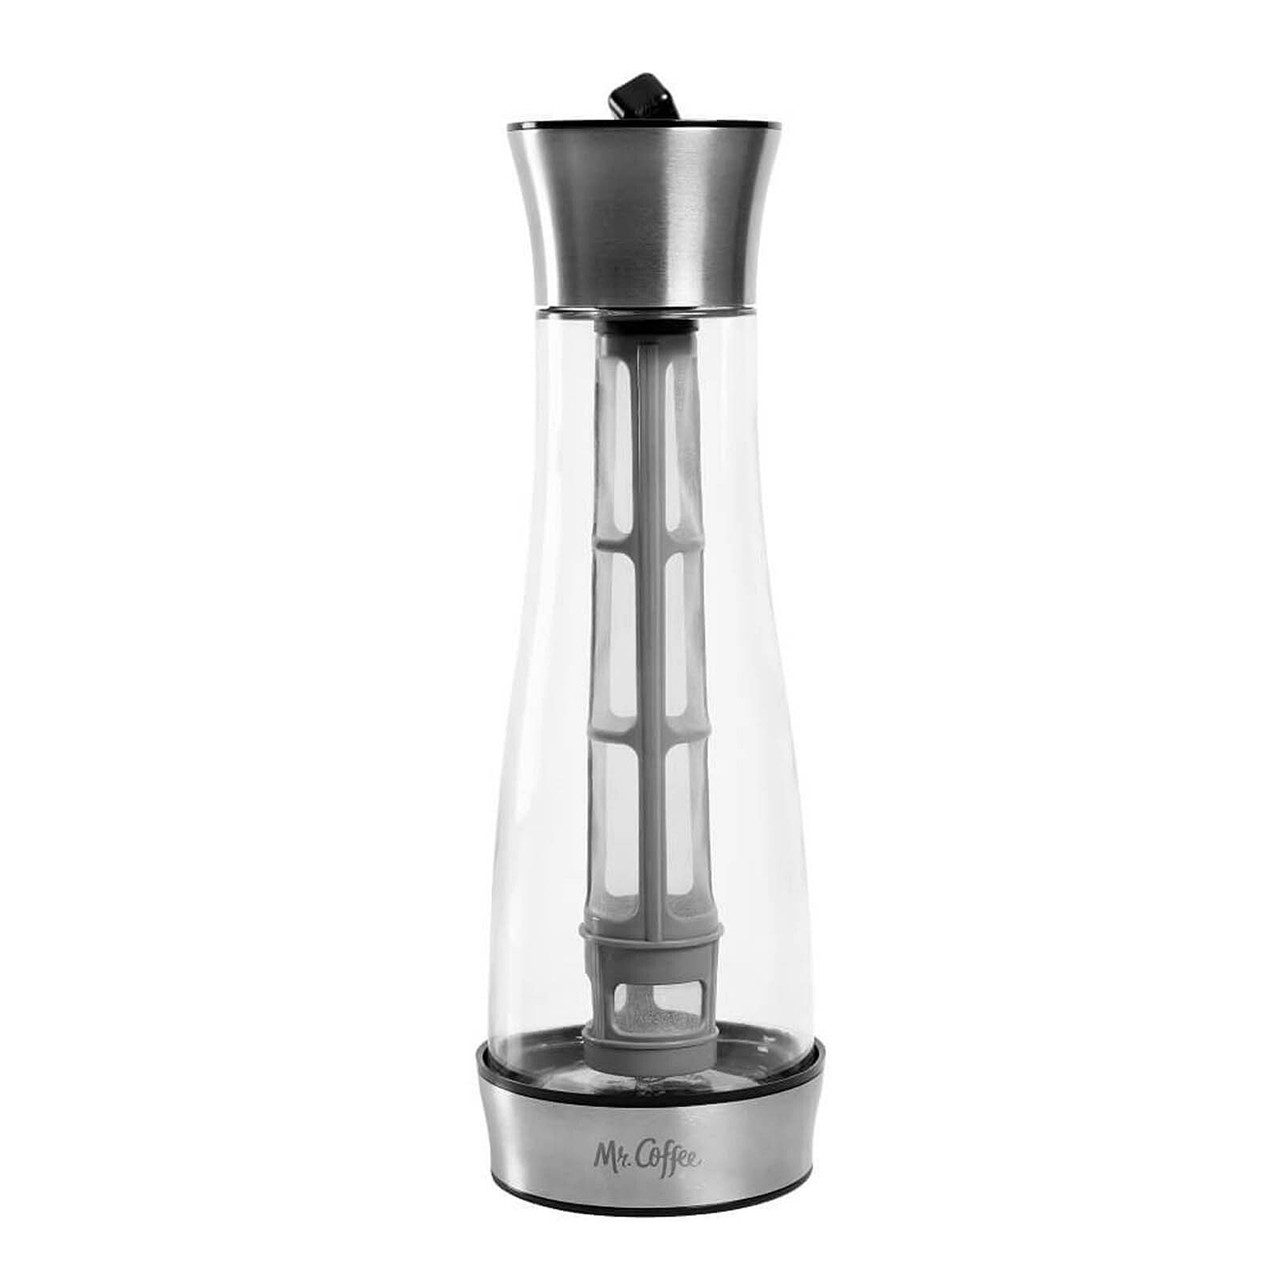 Mr Coffee Uber Caffé 35 Ounce Glass Carafe Cold Brew Coffee Maker with Filter